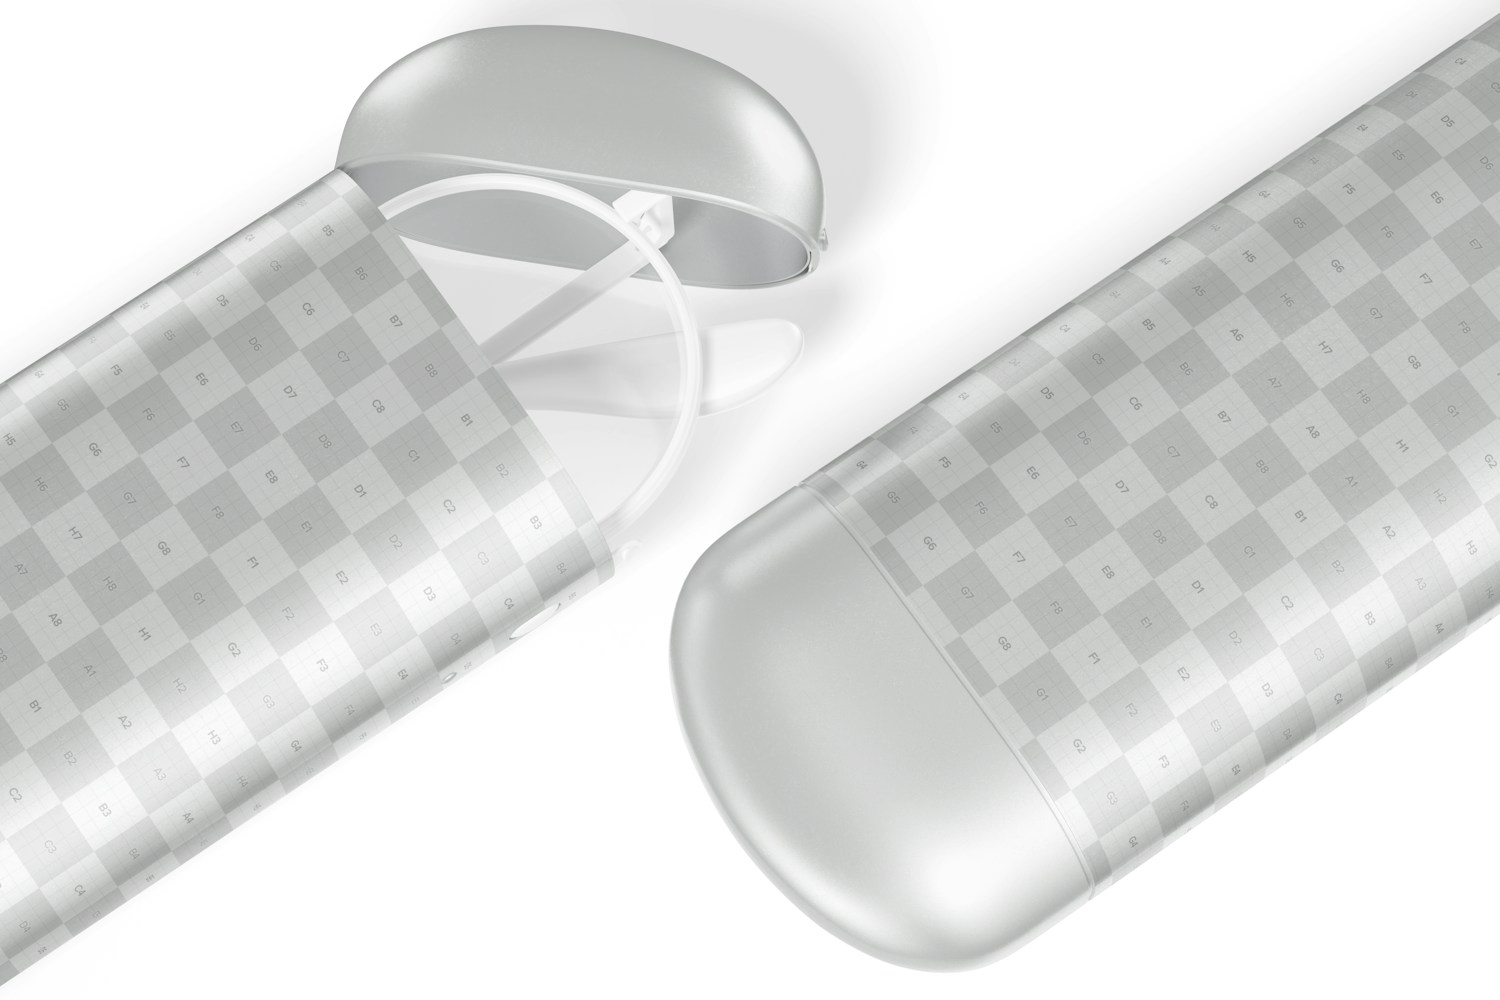 Stainless Steel Glasses Case Mockup, Close Up